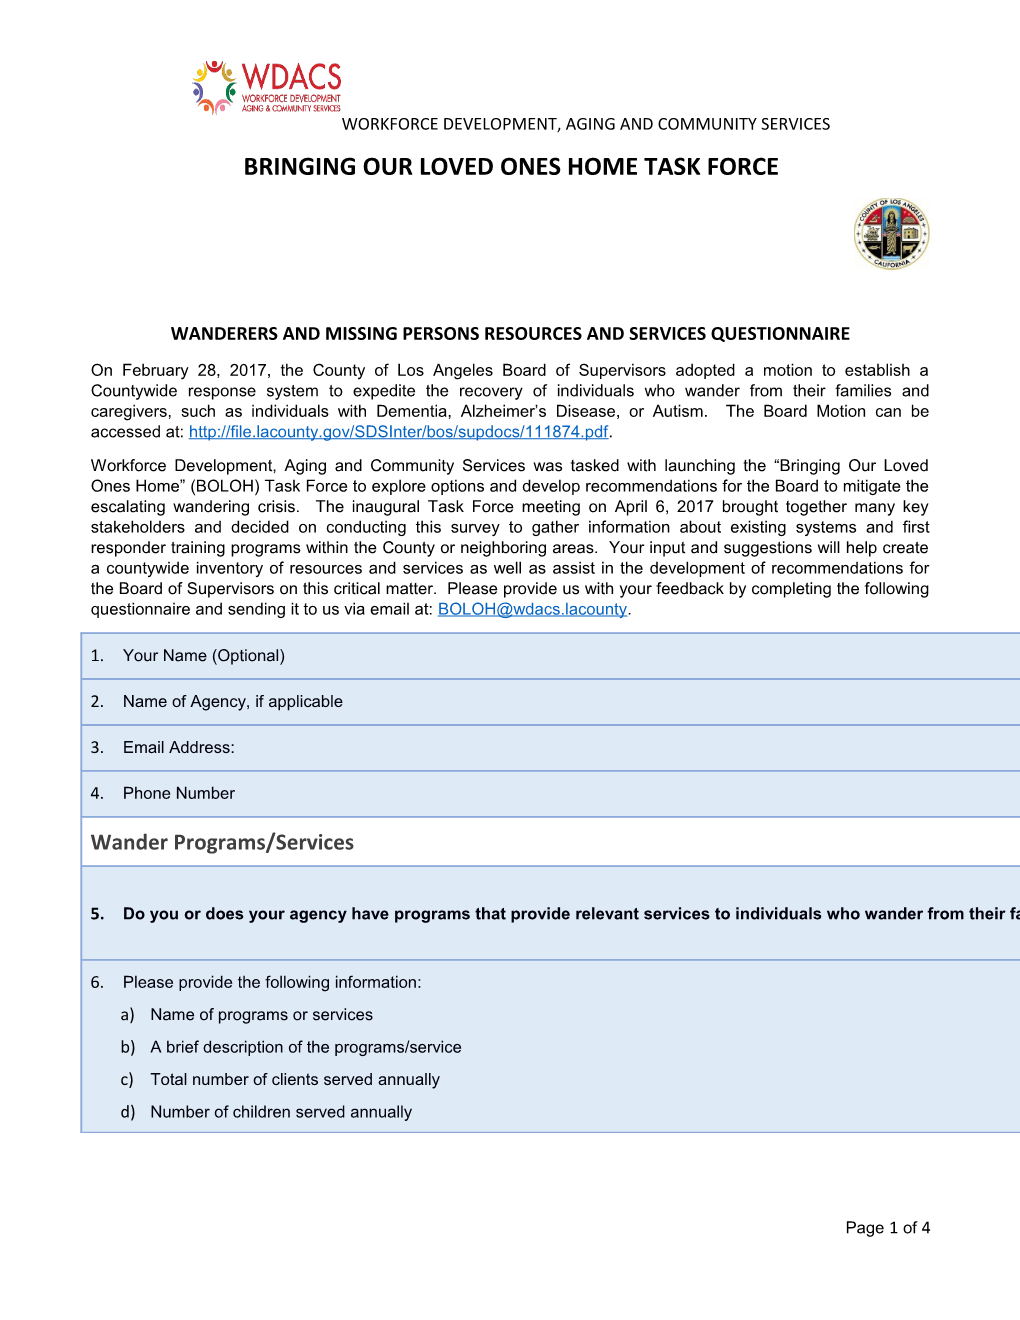 Wanderers and Missing Persons Resources and Services Questionnaire